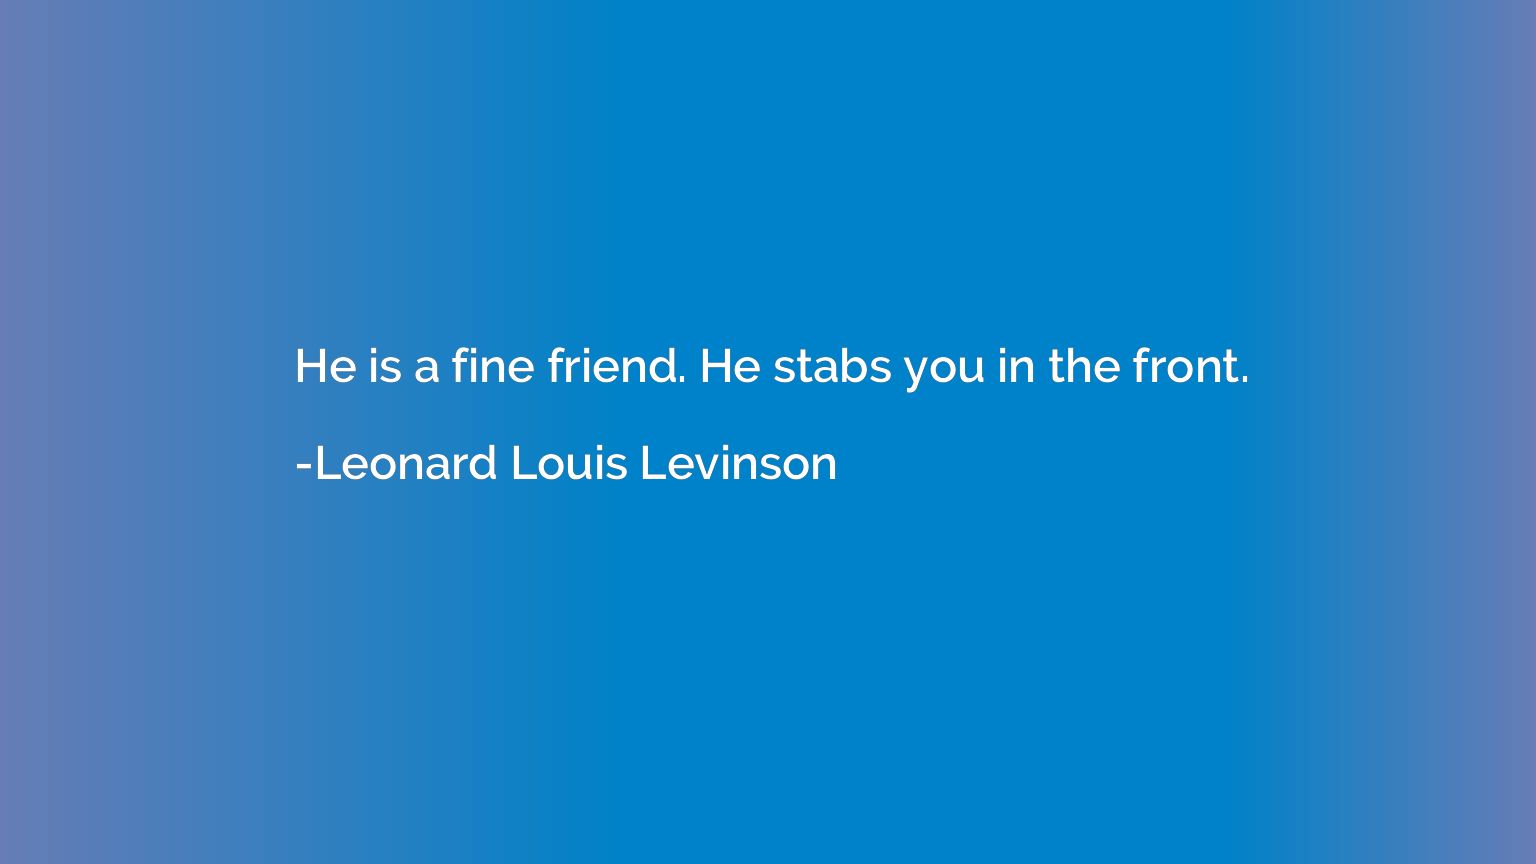 He is a fine friend. He stabs you in the front.